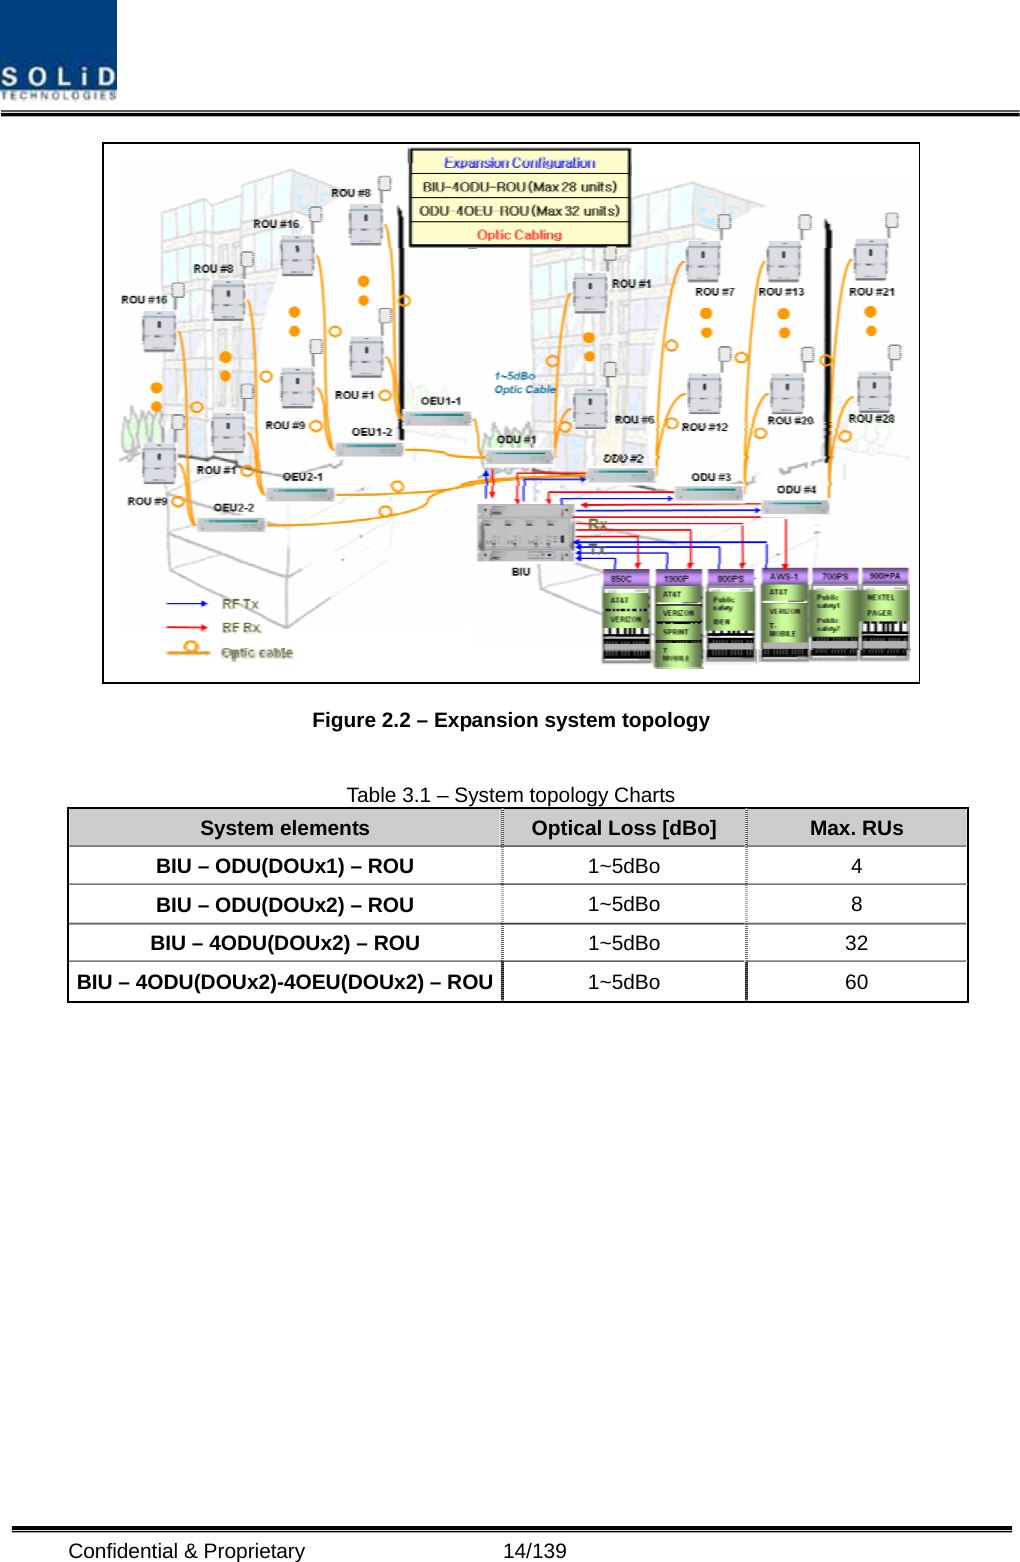  Confidential &amp; Proprietary                   14/139  Figure 2.2 – Expansion system topology    Table 3.1 – System topology Charts System elements  Optical Loss [dBo]  Max. RUs BIU – ODU(DOUx1) – ROU    1~5dBo 4 BIU – ODU(DOUx2) – ROU  1~5dBo 8 BIU – 4ODU(DOUx2) – ROU  1~5dBo 32 BIU – 4ODU(DOUx2)-4OEU(DOUx2) – ROU 1~5dBo 60             